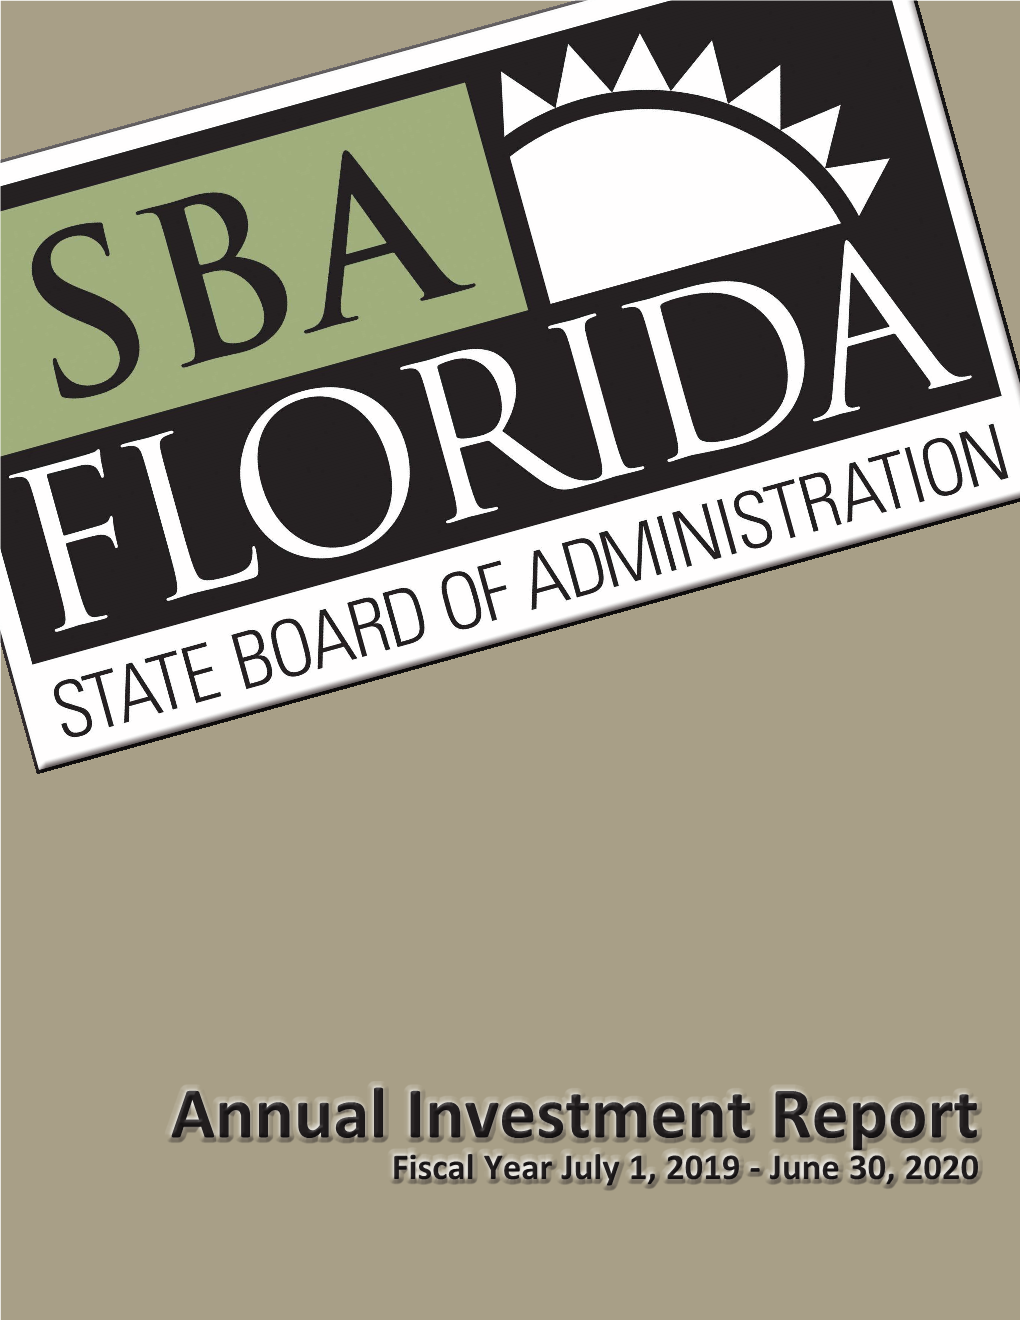 Annual Investment Report Fiscal Year July 1, 2019 - June 30, 2020 State Board of Administration Table of Contents